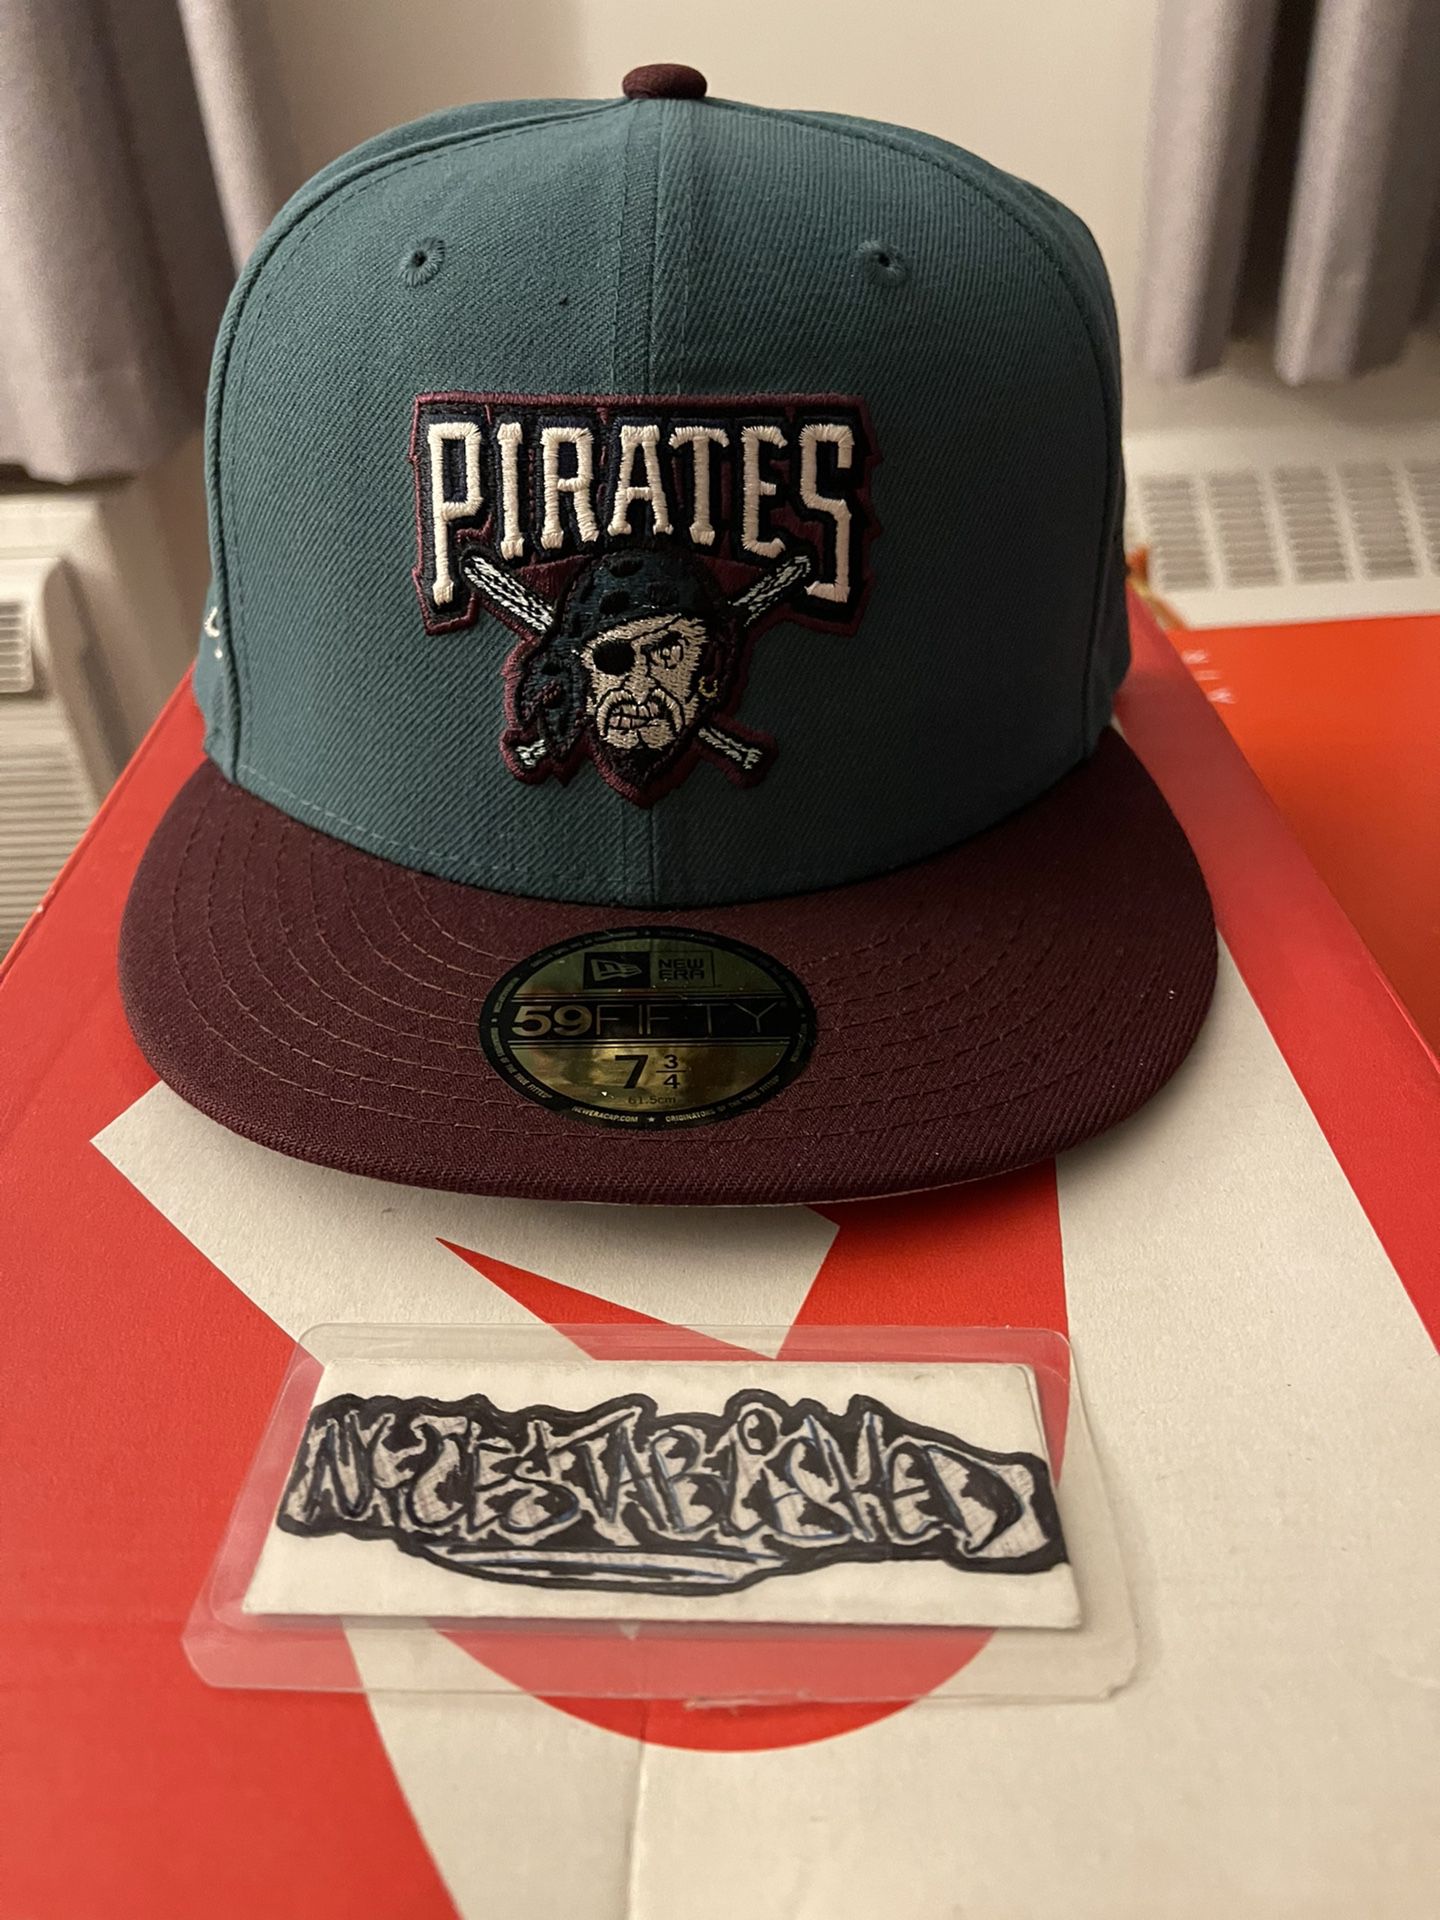 Pittsburgh Pirates Limited Edition Fitted Hat Size 7 3/4 for Sale in New  York, NY - OfferUp